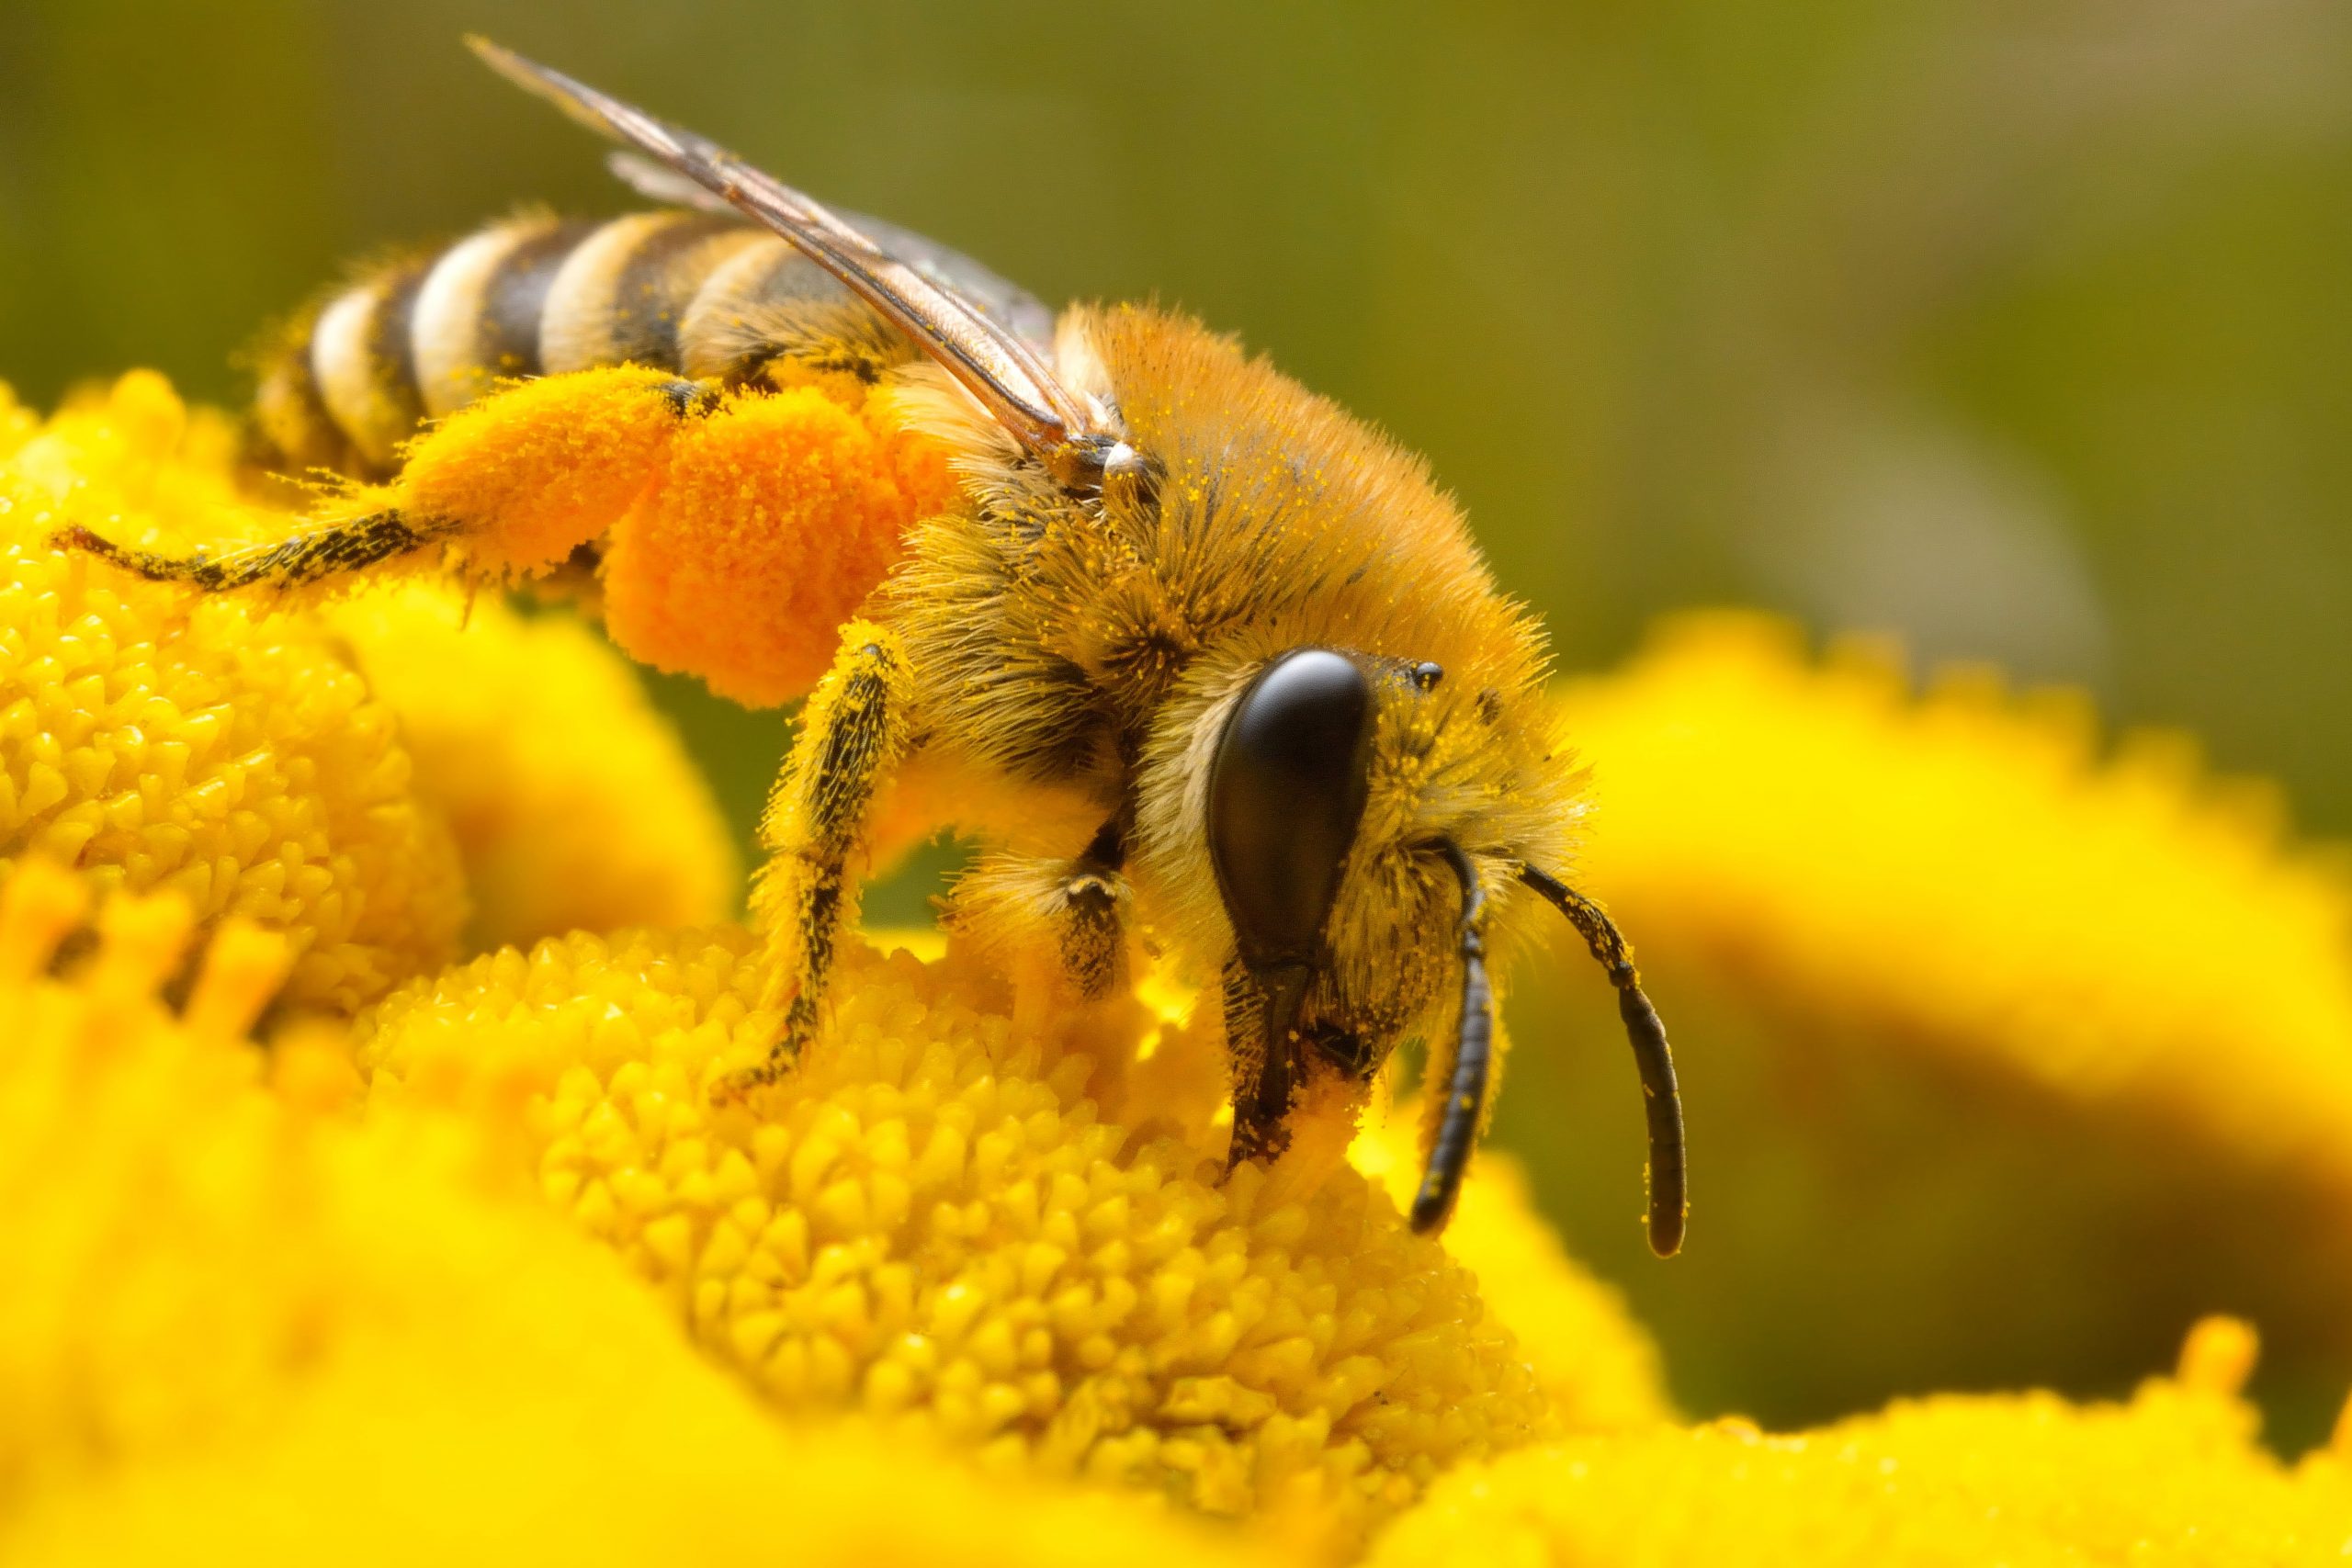 Micro photo of Honey bee perched on yellow petaled flower, insect wallpaper